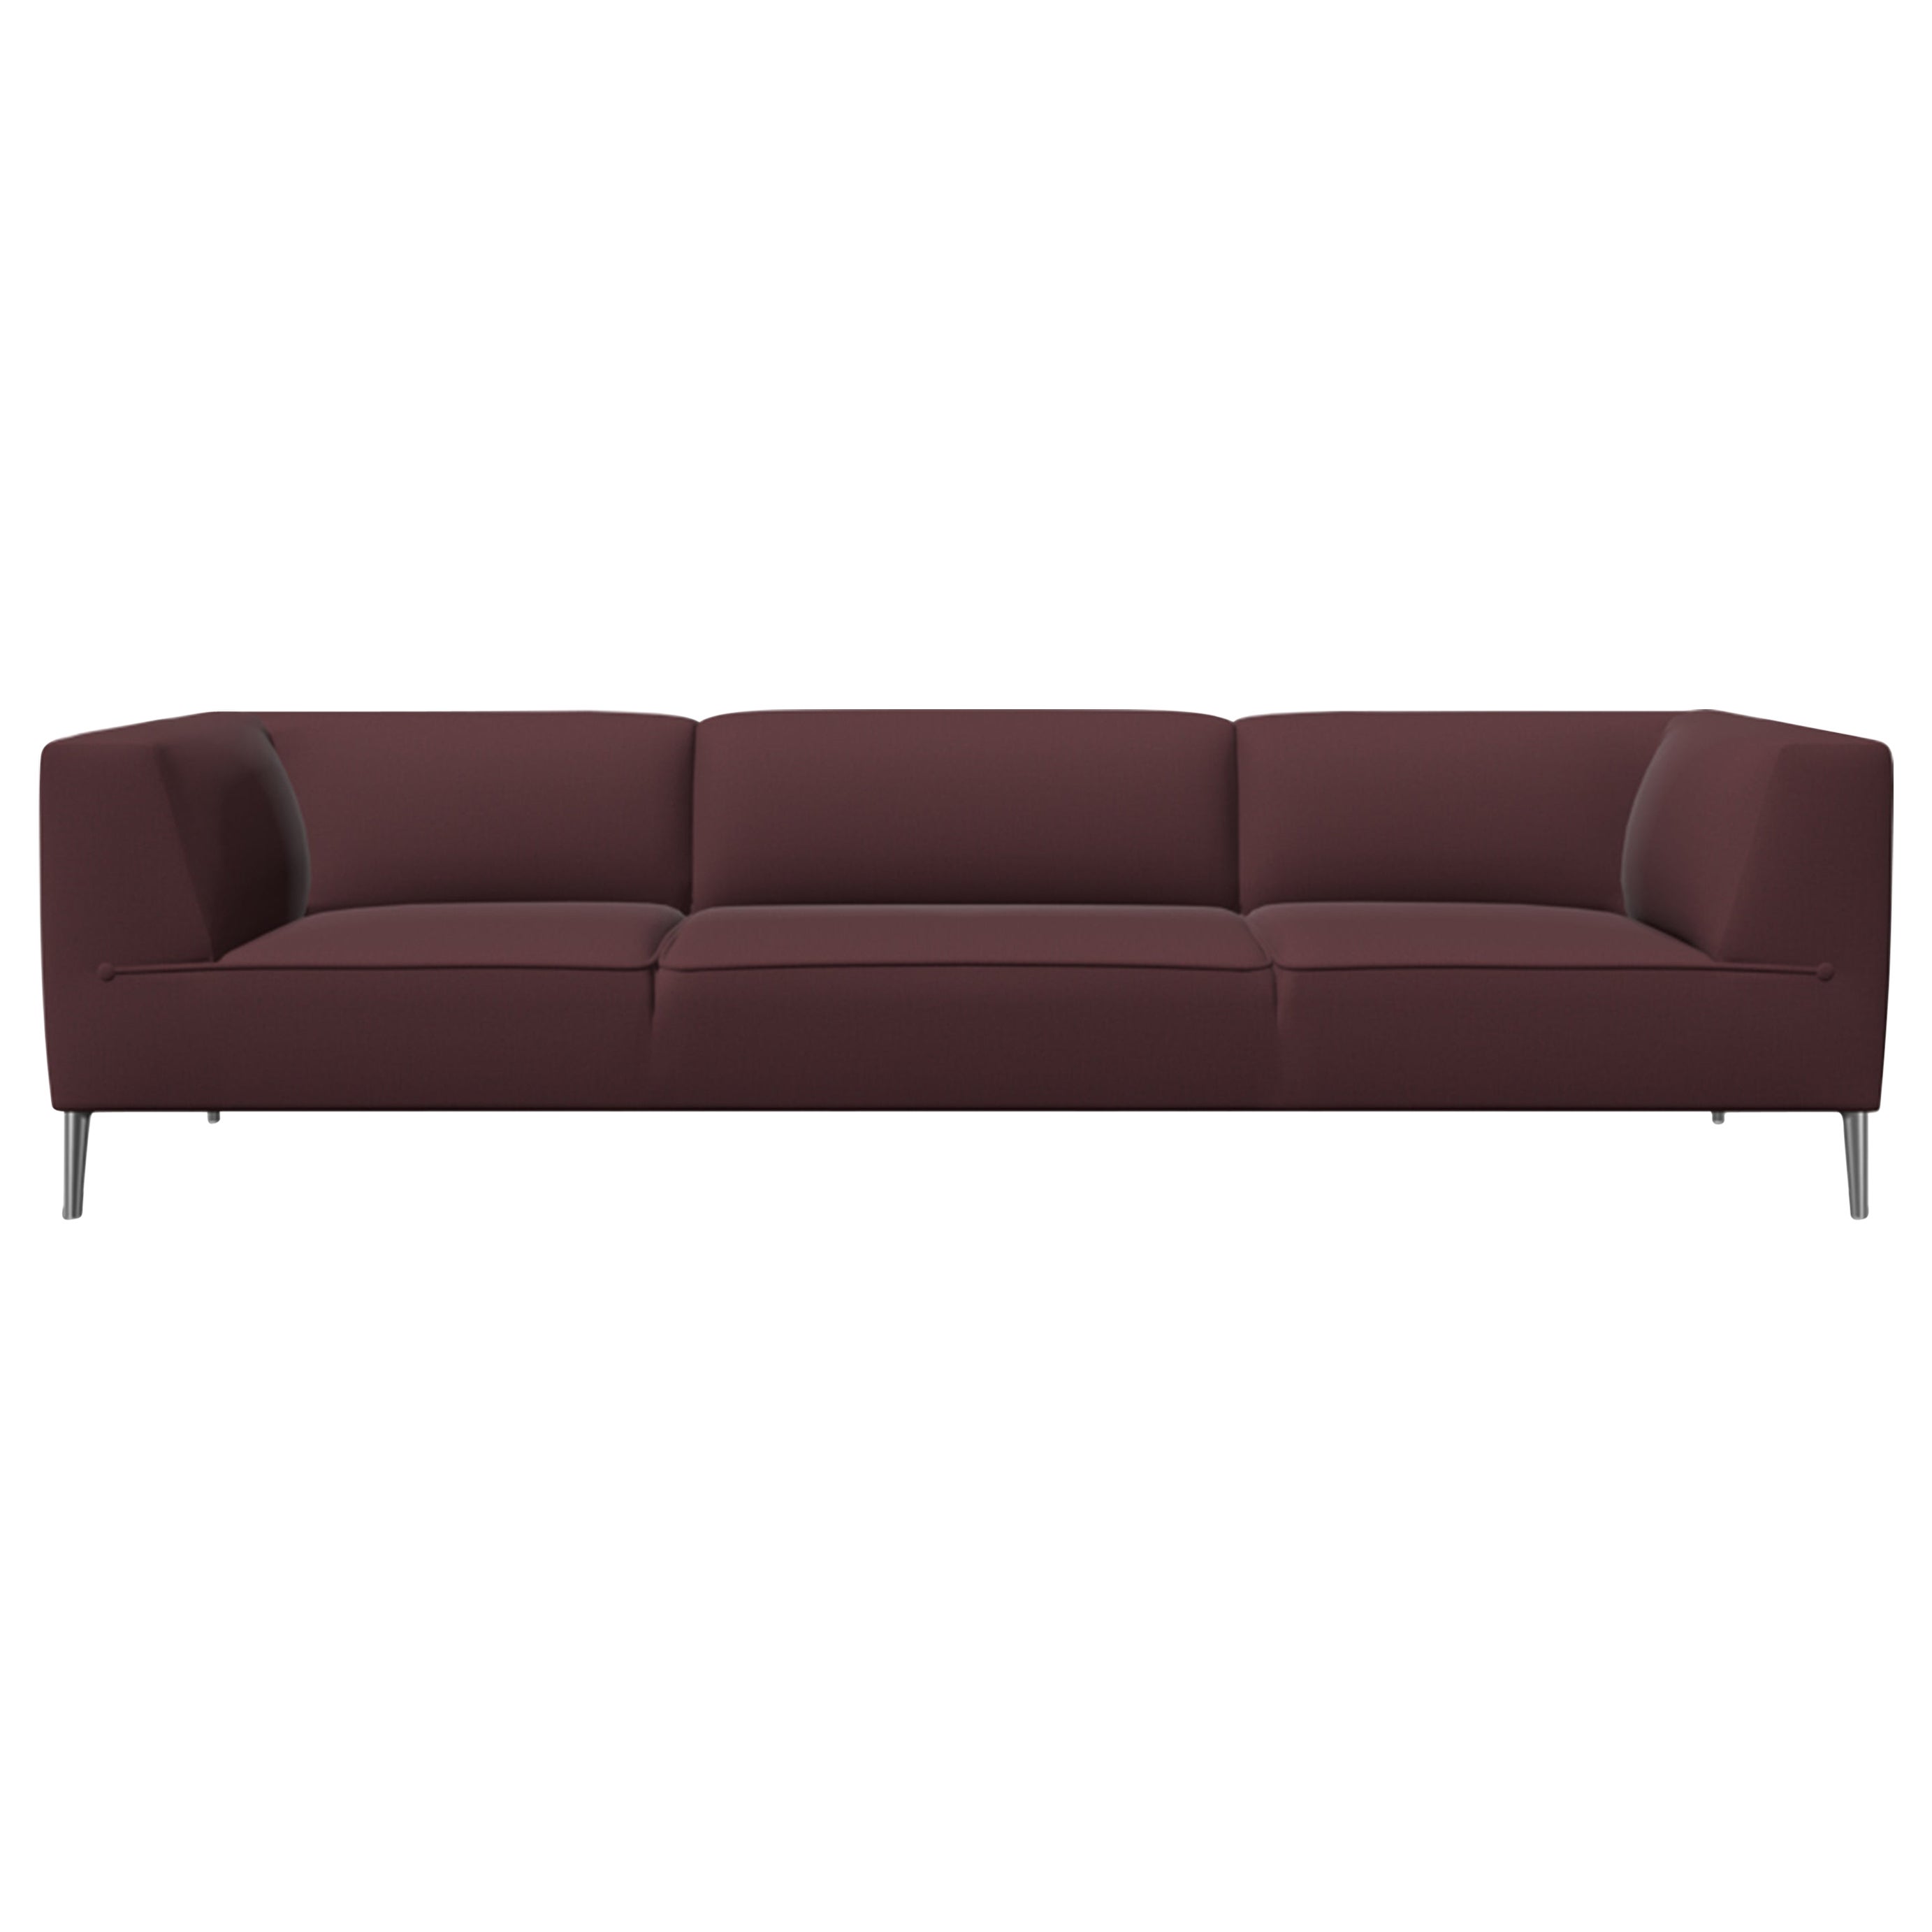 Moooi Triple Seat Sofa So Good in Justo Upholstery with Polished Aluminum Feet For Sale